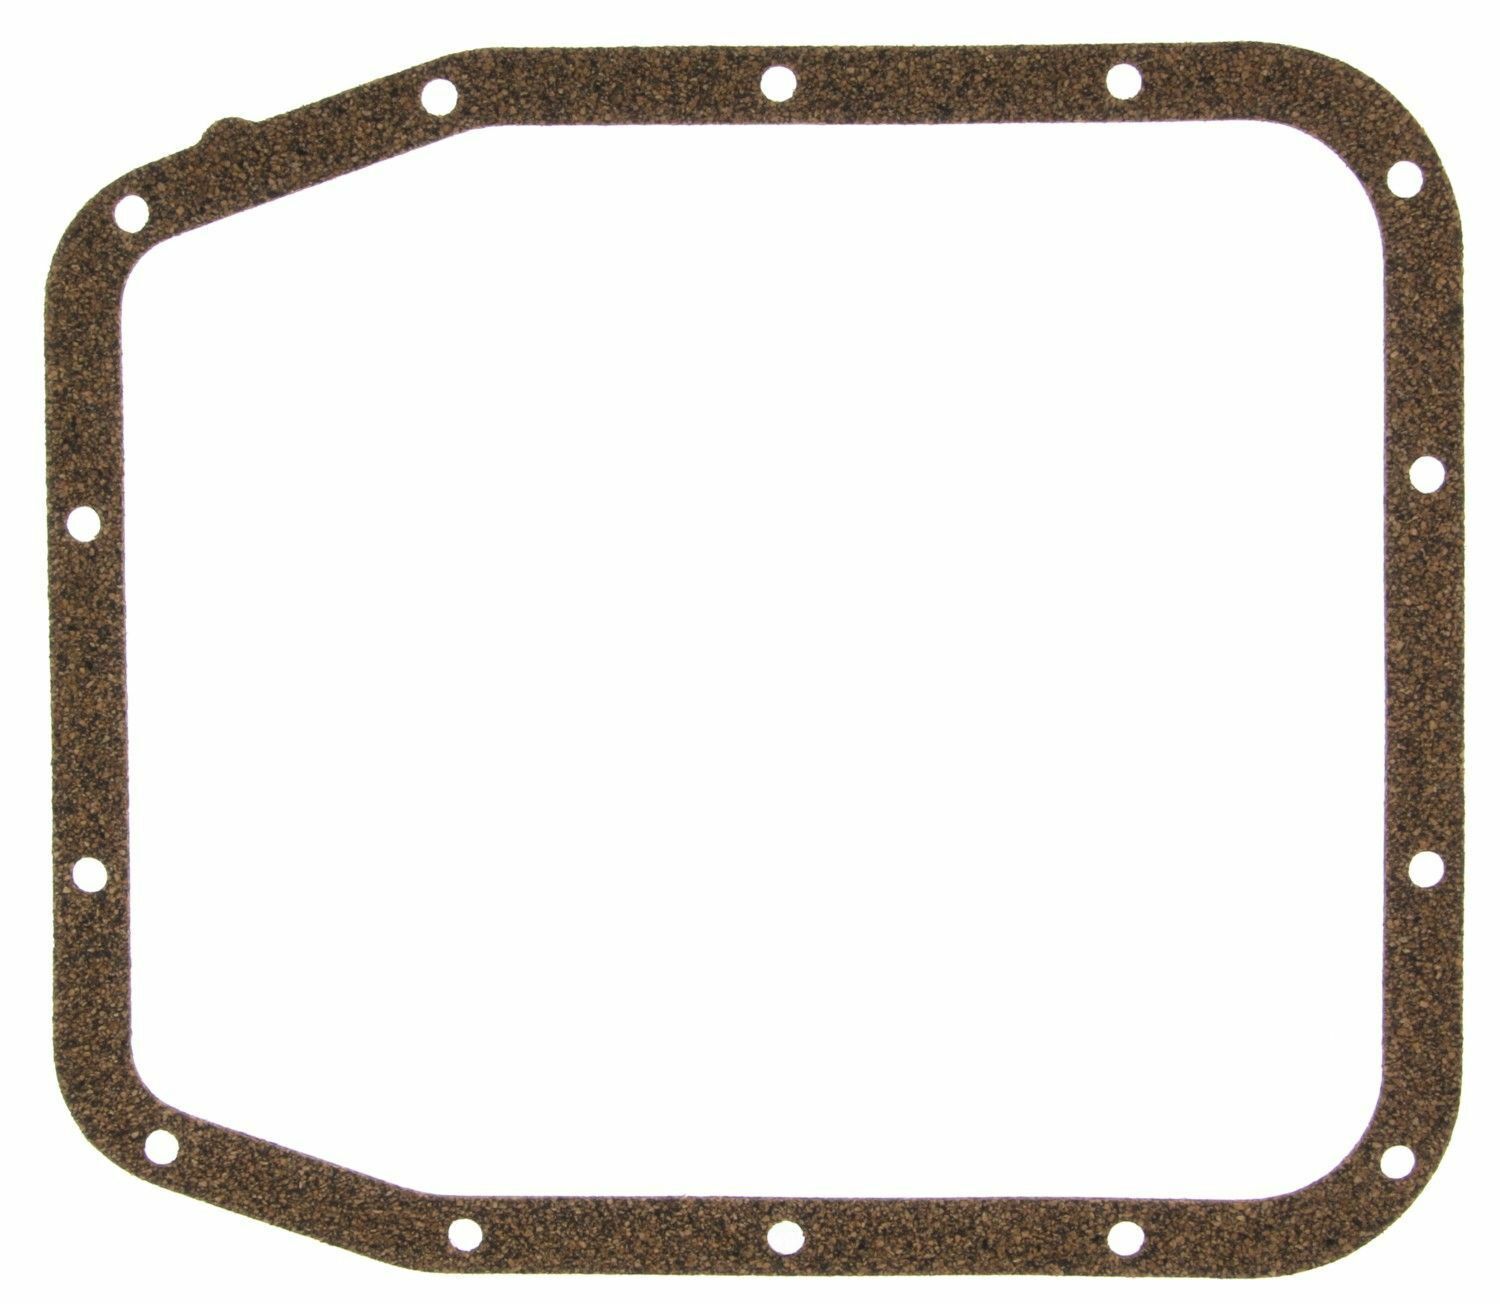 MAHLE Automatic Transmission Oil Pan Gasket W38430